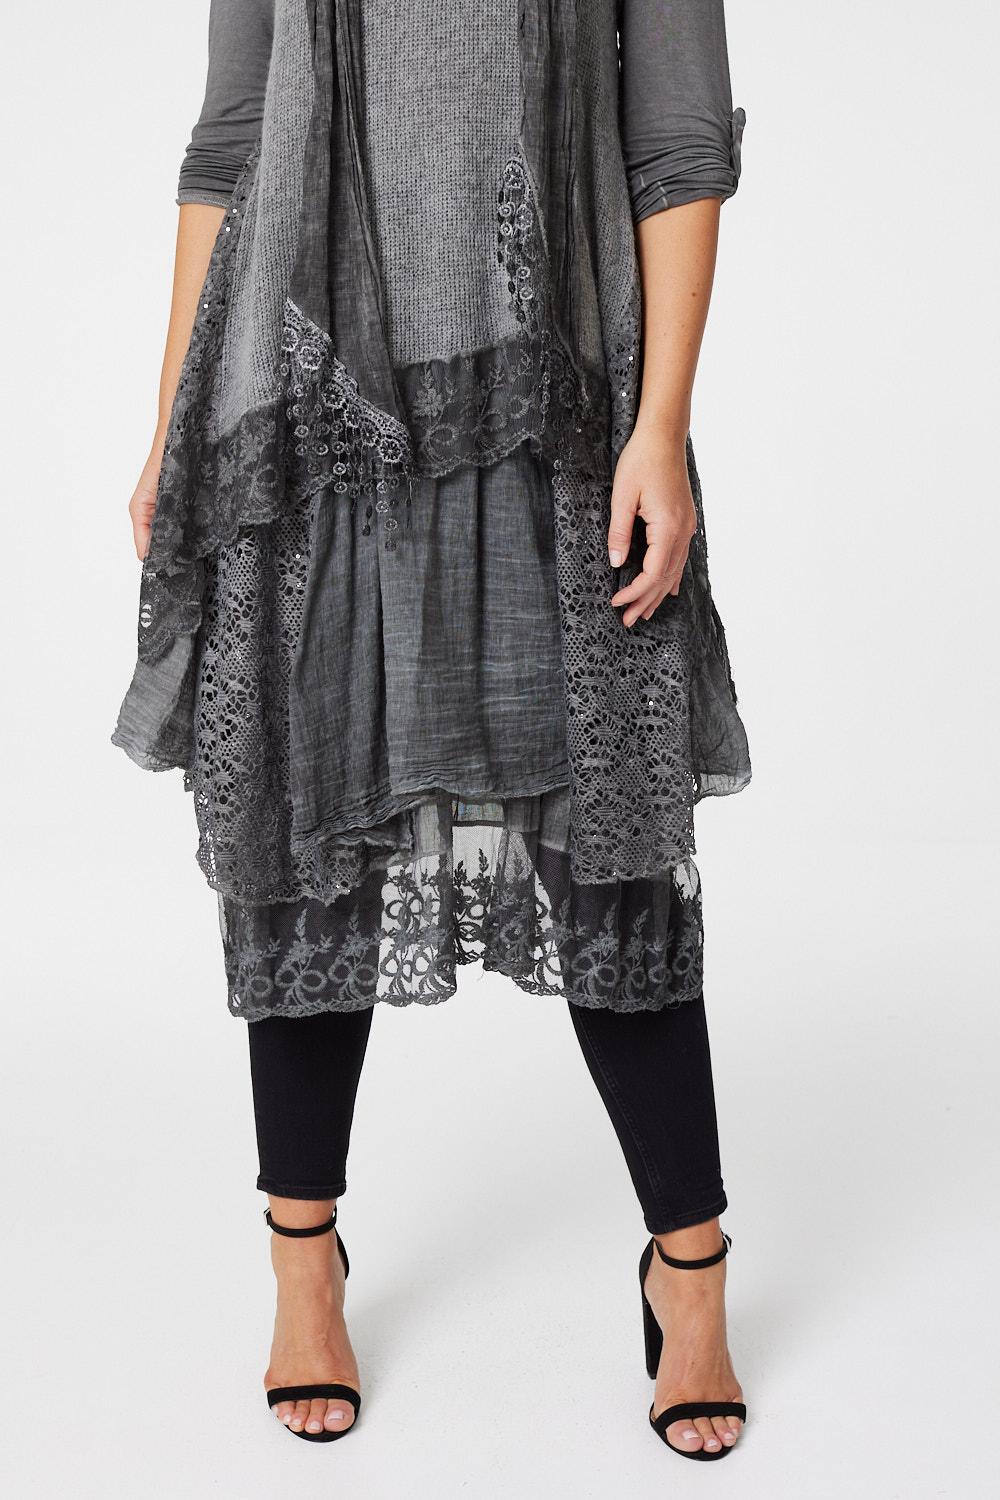 Grey | Lace Detail Oversized Tunic Top